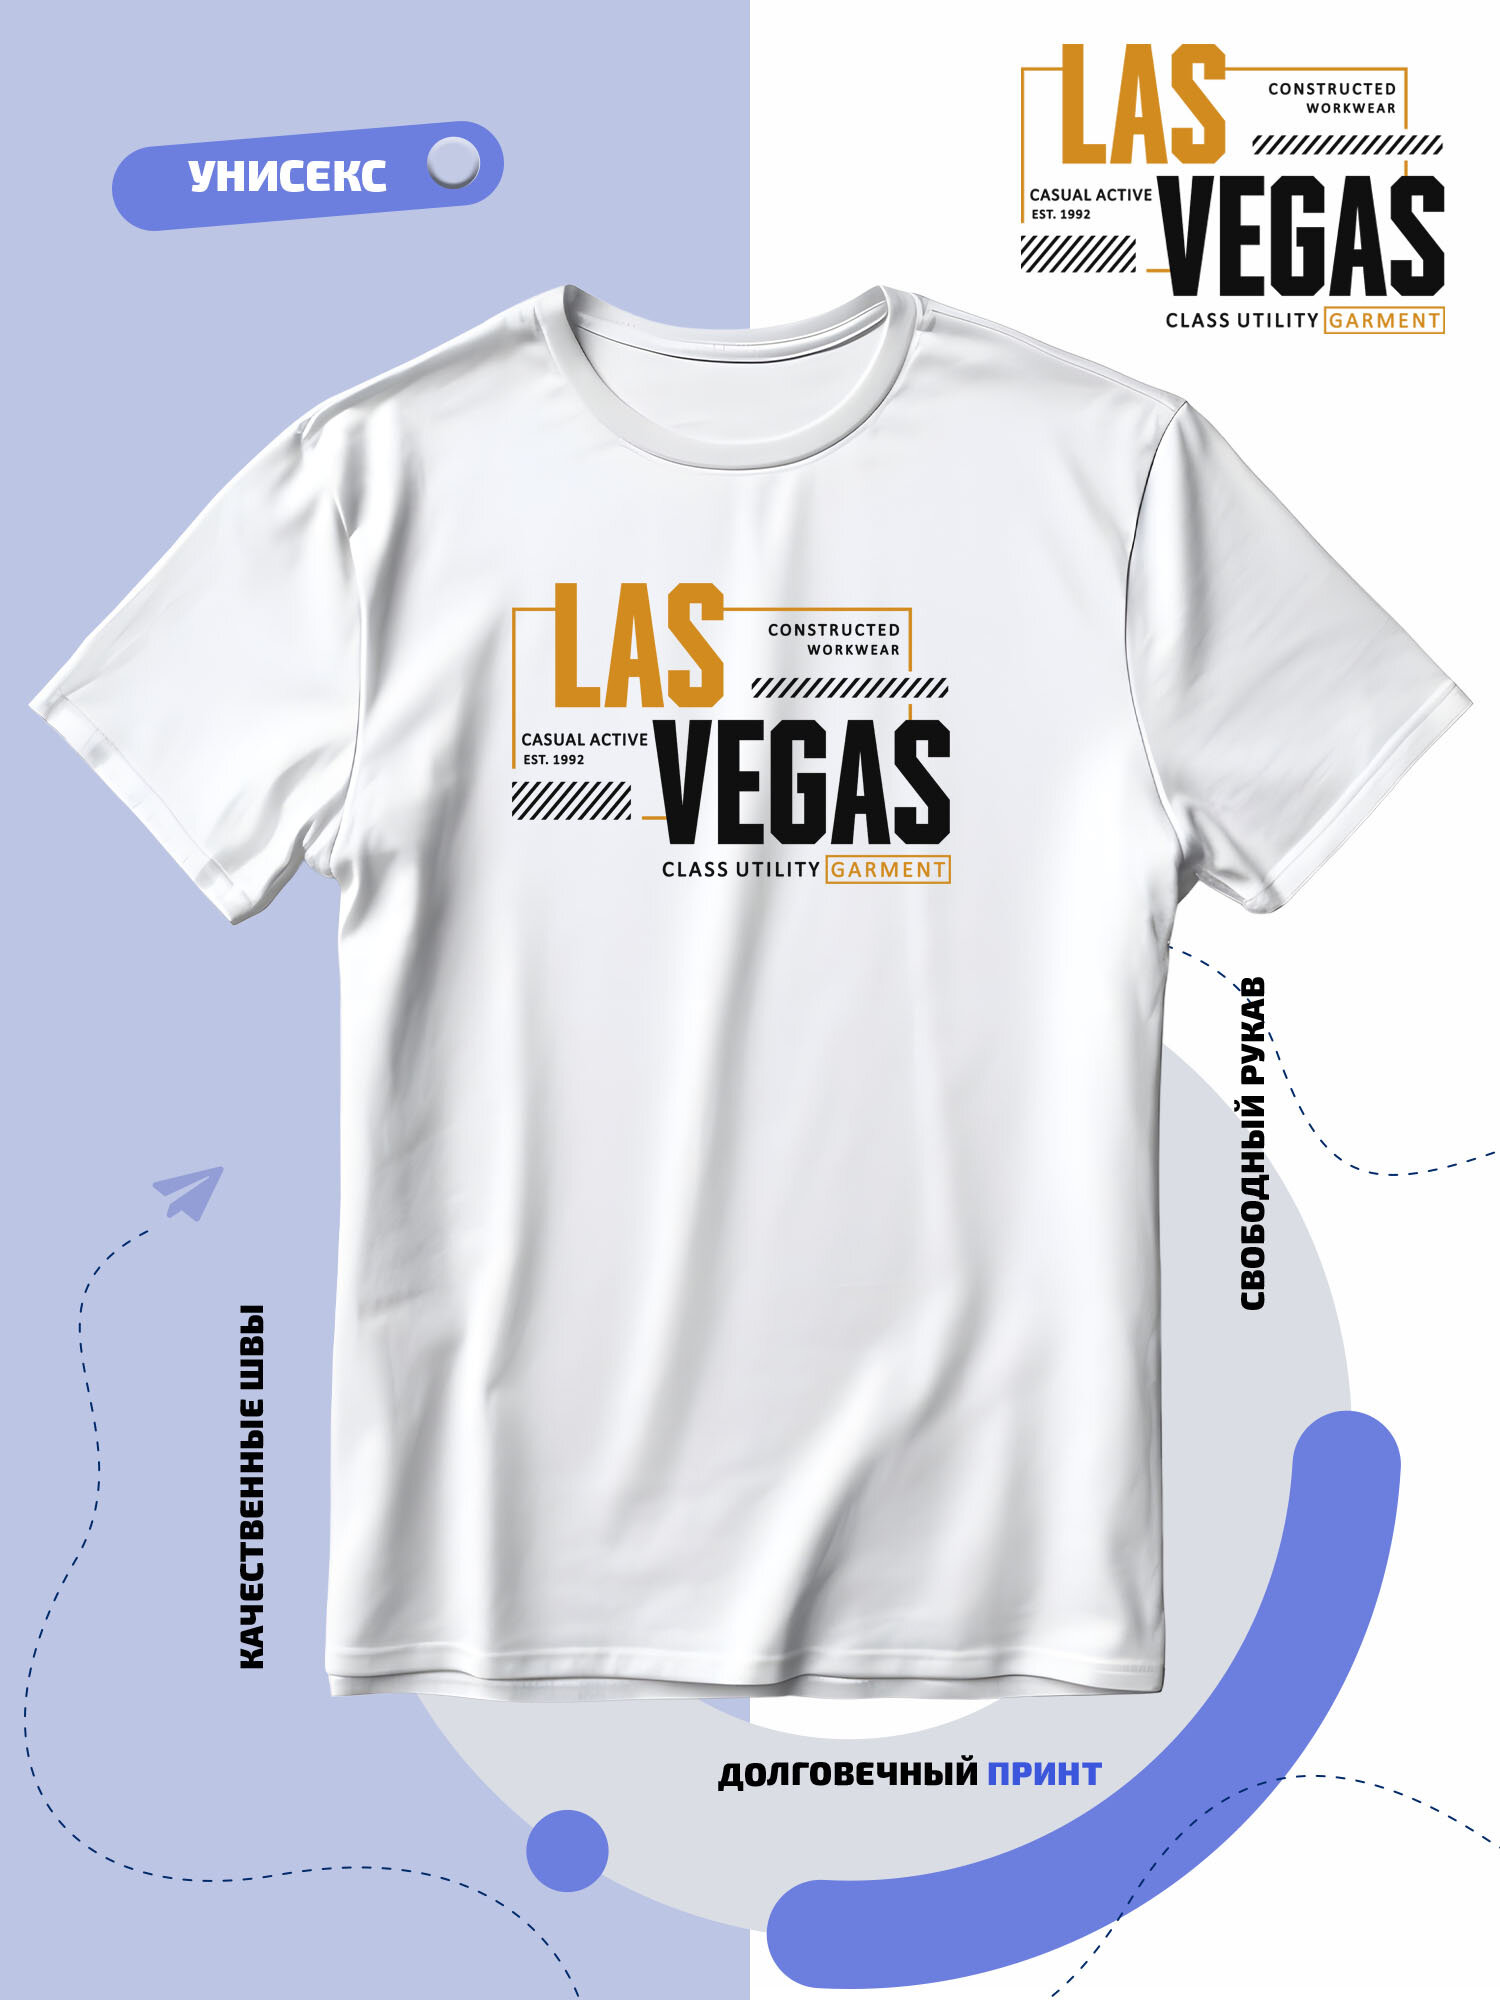 Футболка SMAIL-P Las Vegas constructed workwear casual active